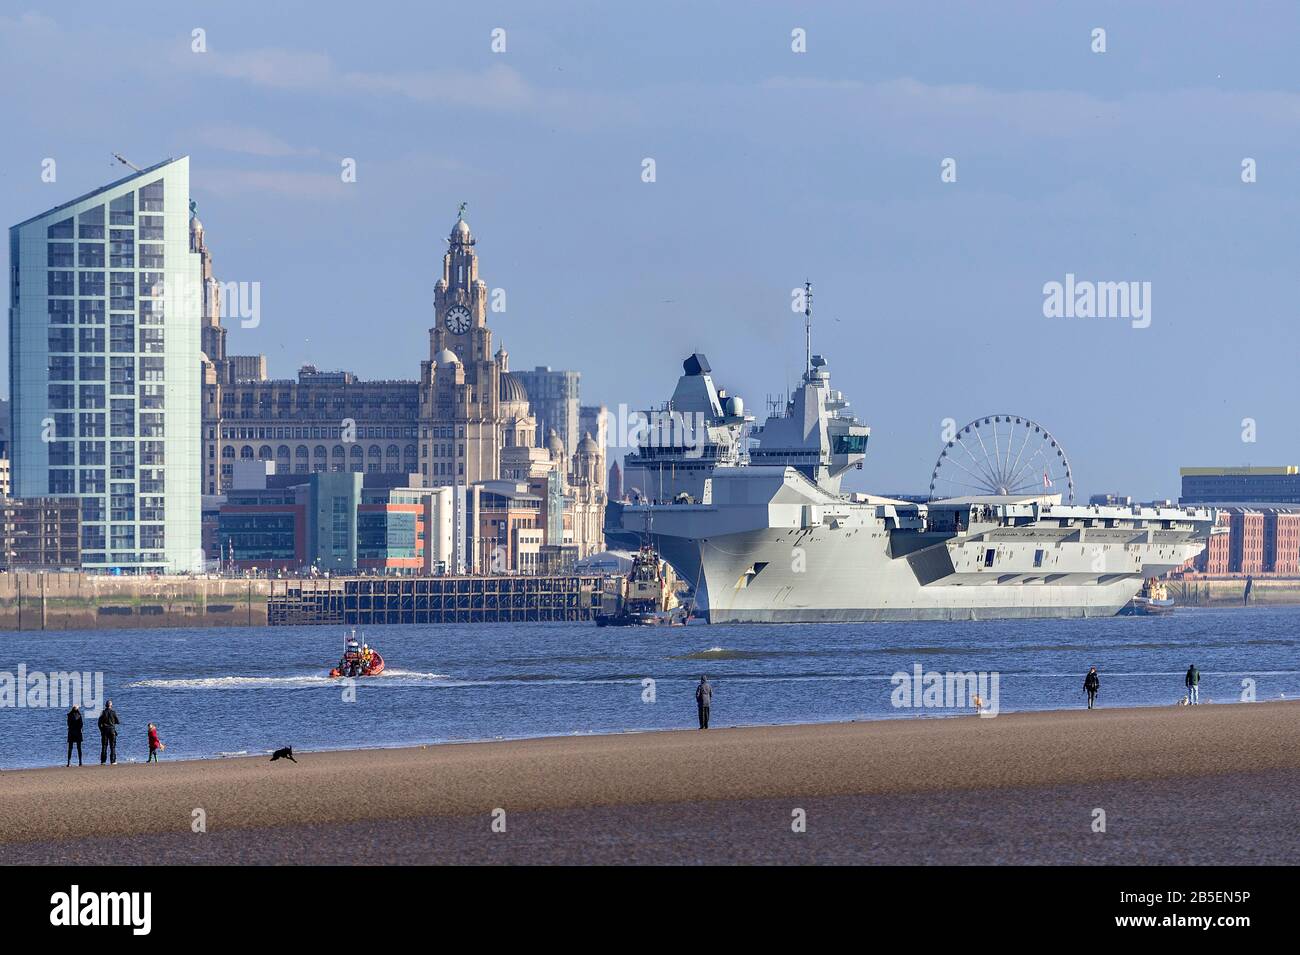 The Royal Navy's latest aircraft carrier HMS Prince of Wales leaves Liverpool pierhead after a week long courtesy visit. Stock Photo